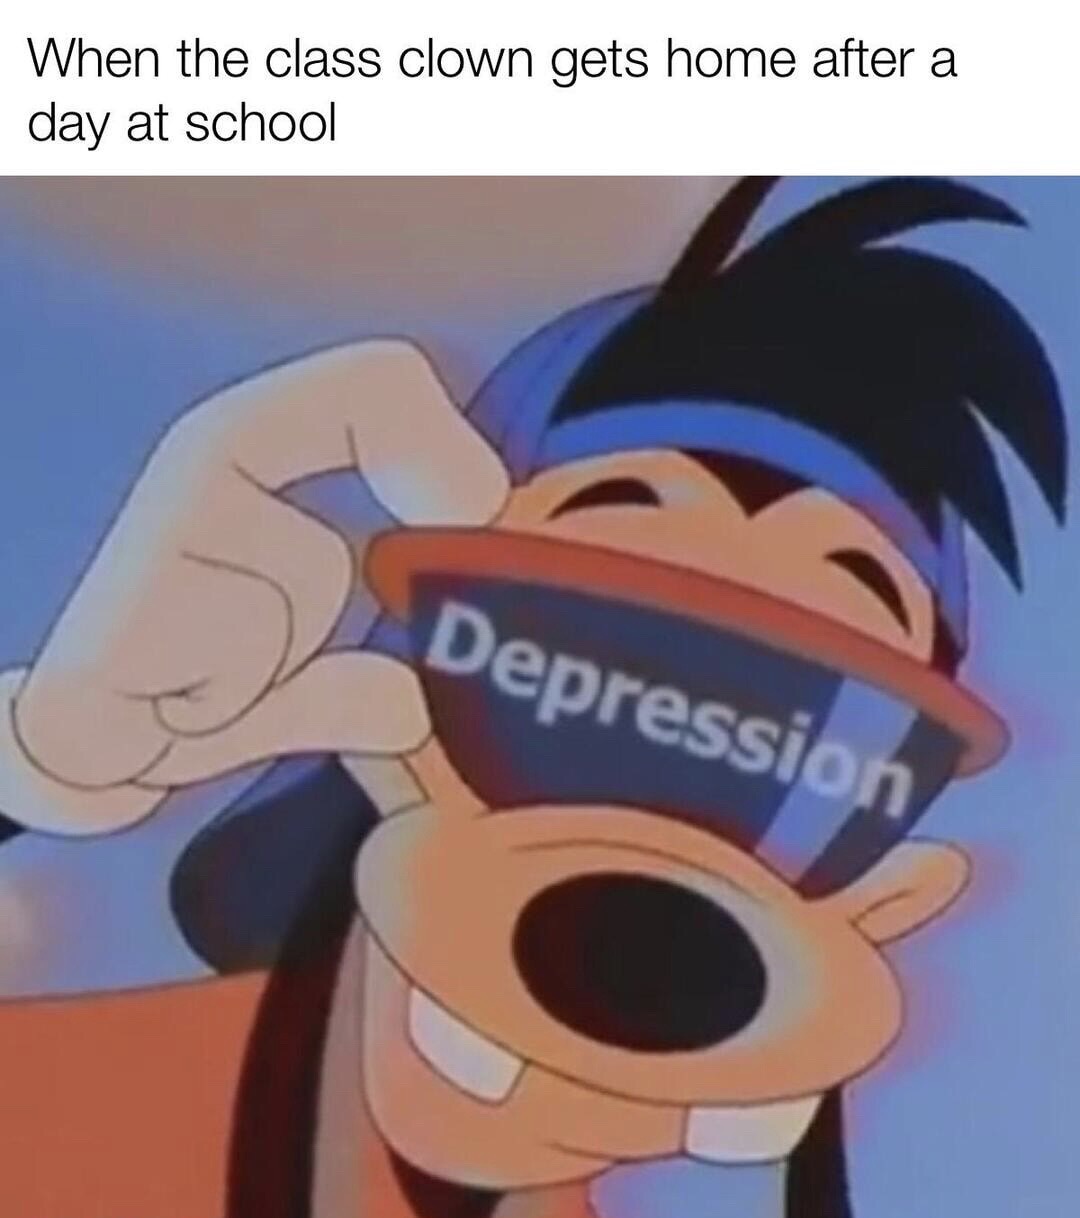 goofy depression - When the class clown gets home after a day at school Depression